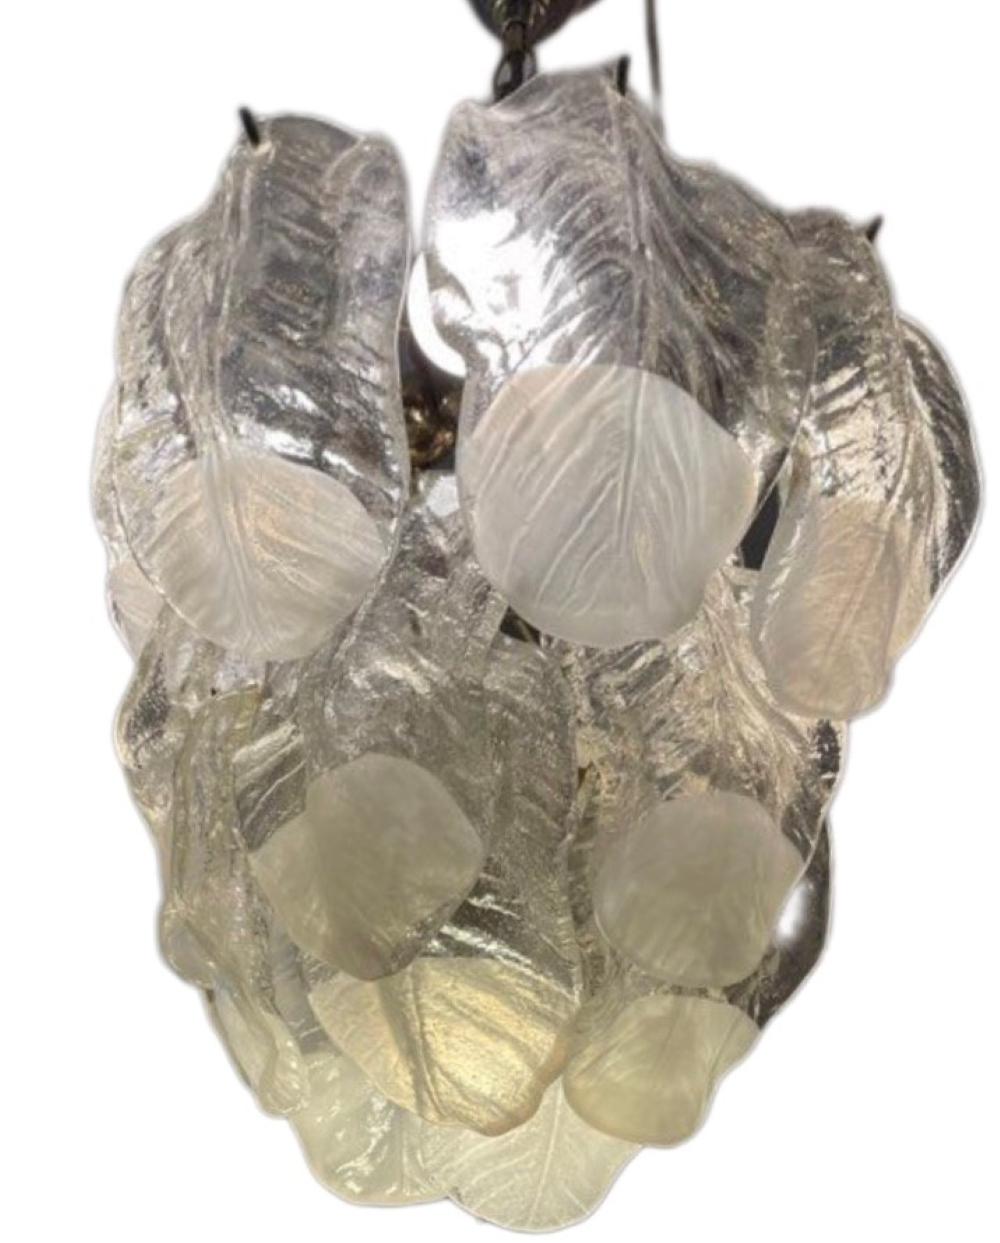 Superb Murano glass chandelier. The glass is cut by hand in the shape of leaves.
The chandelier consists of a golden metal structure and 24 sheets of translucent and pearly Murano glass. To the touch the leaves are smooth on the outside and granite